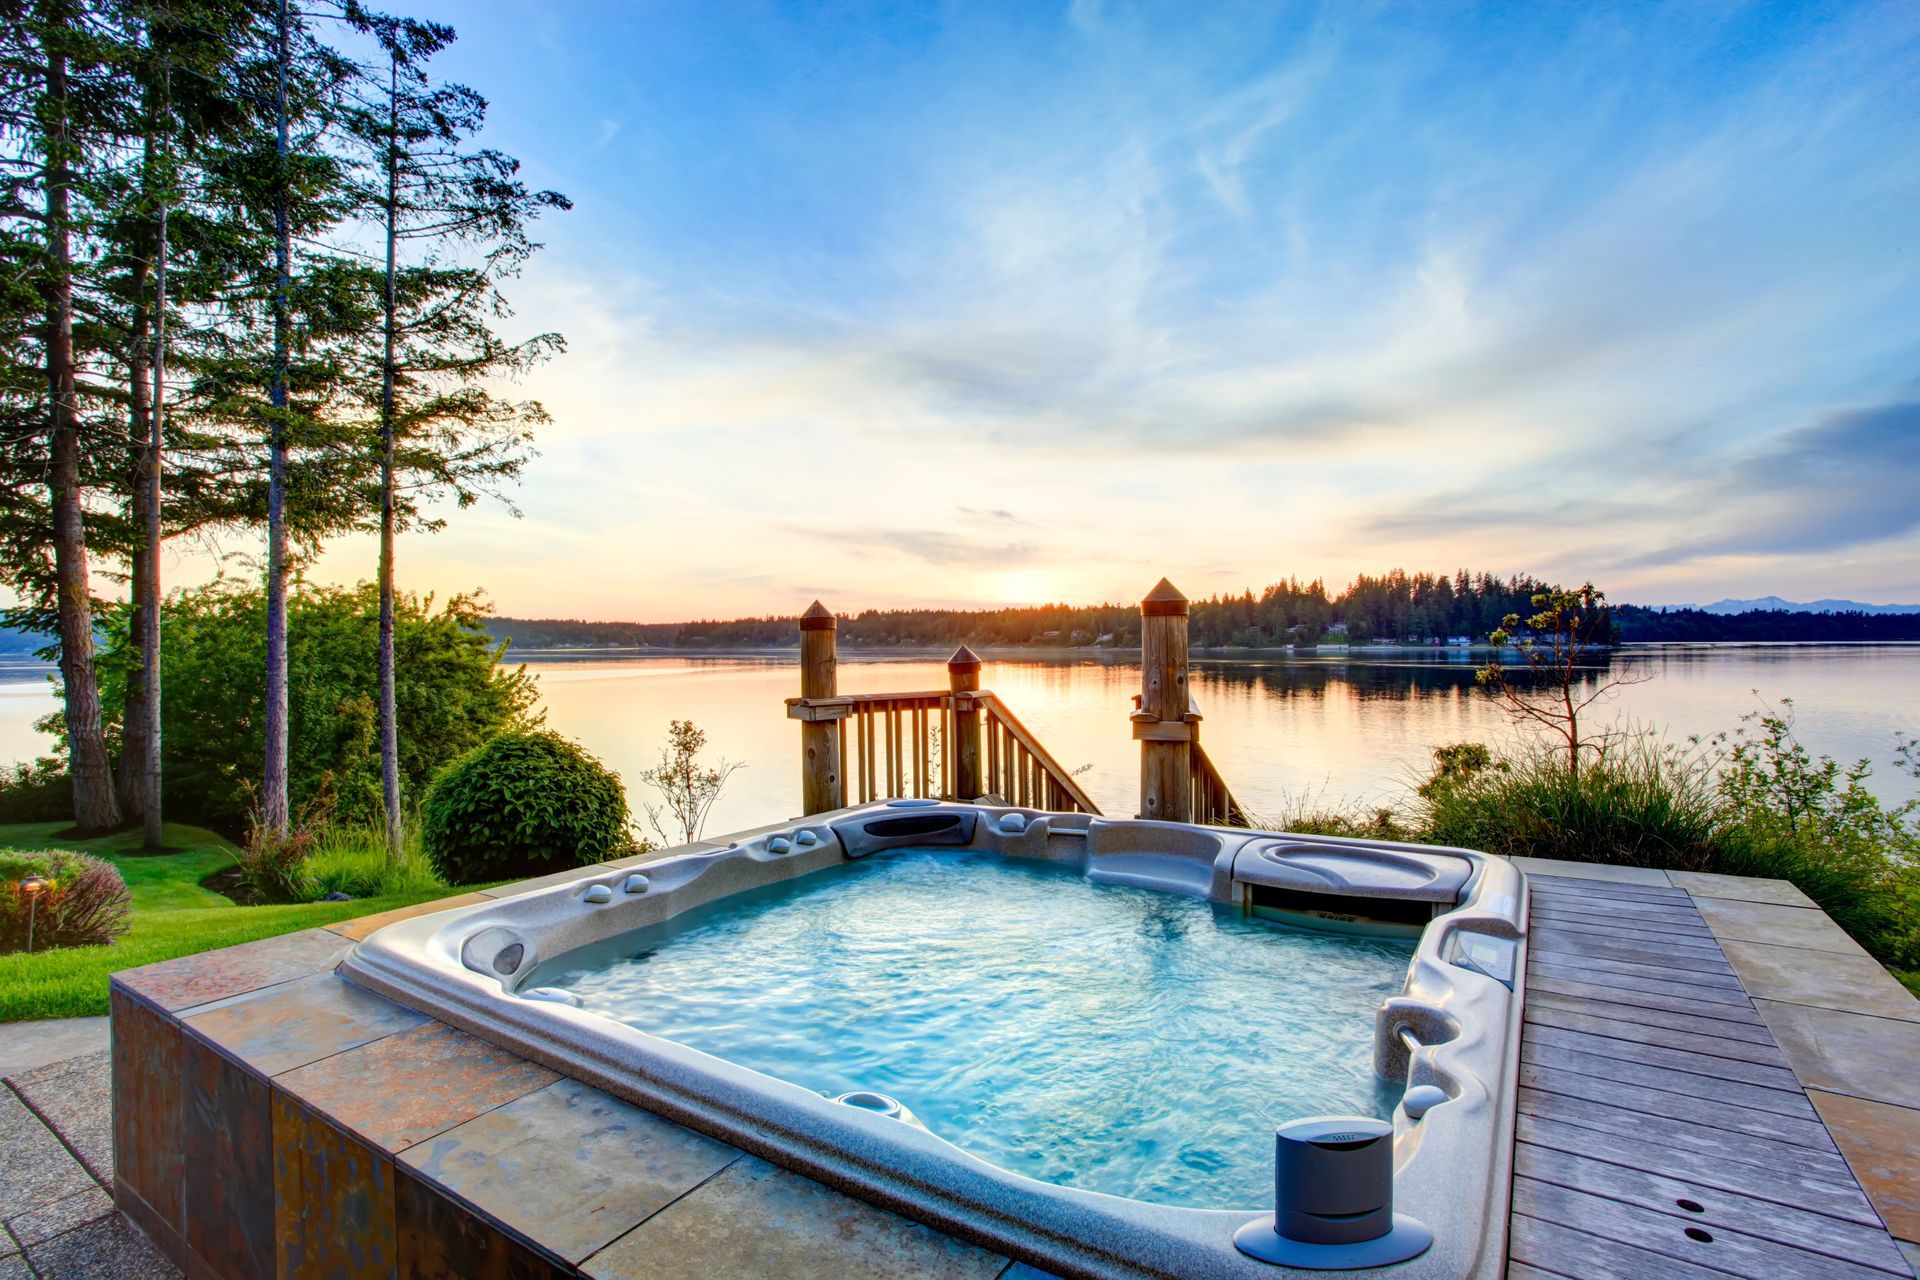 Awesome water view with hot tub in summer evening